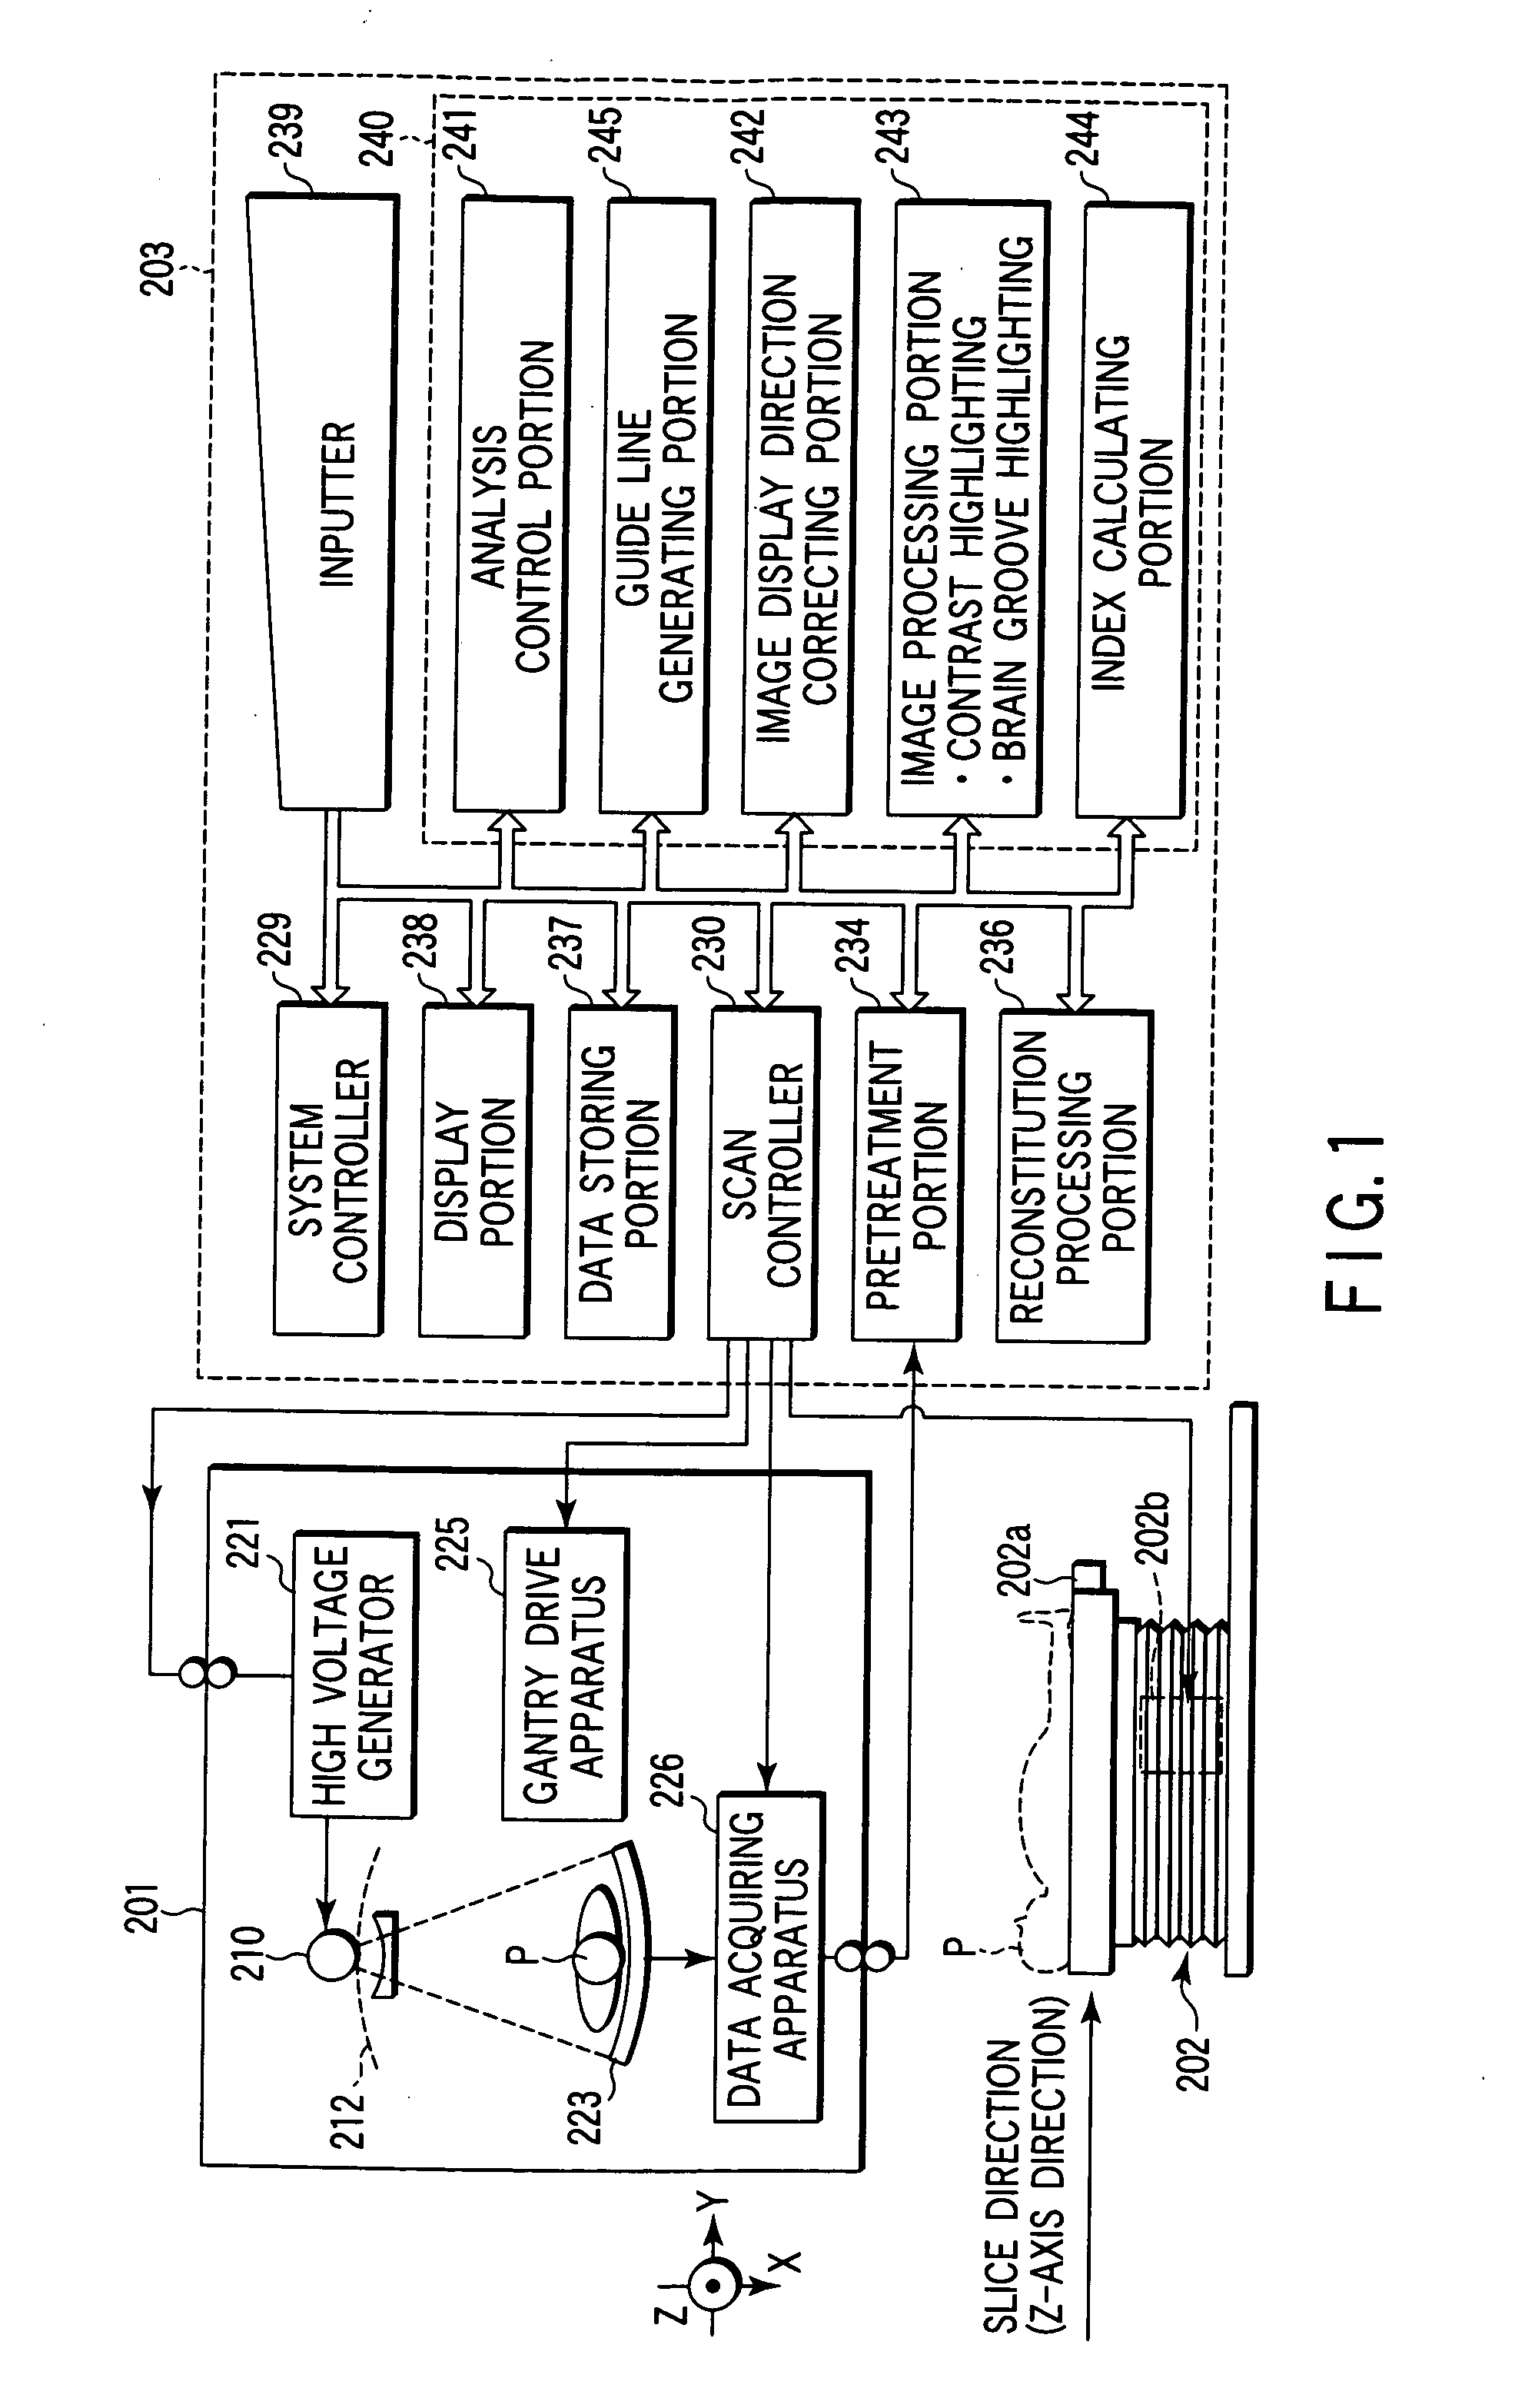 Cerebral ischemia diagnosis assisting apparatus, X-ray computer tomography apparatus, and apparatus for aiding diagnosis and treatment of acute cerebral infarct